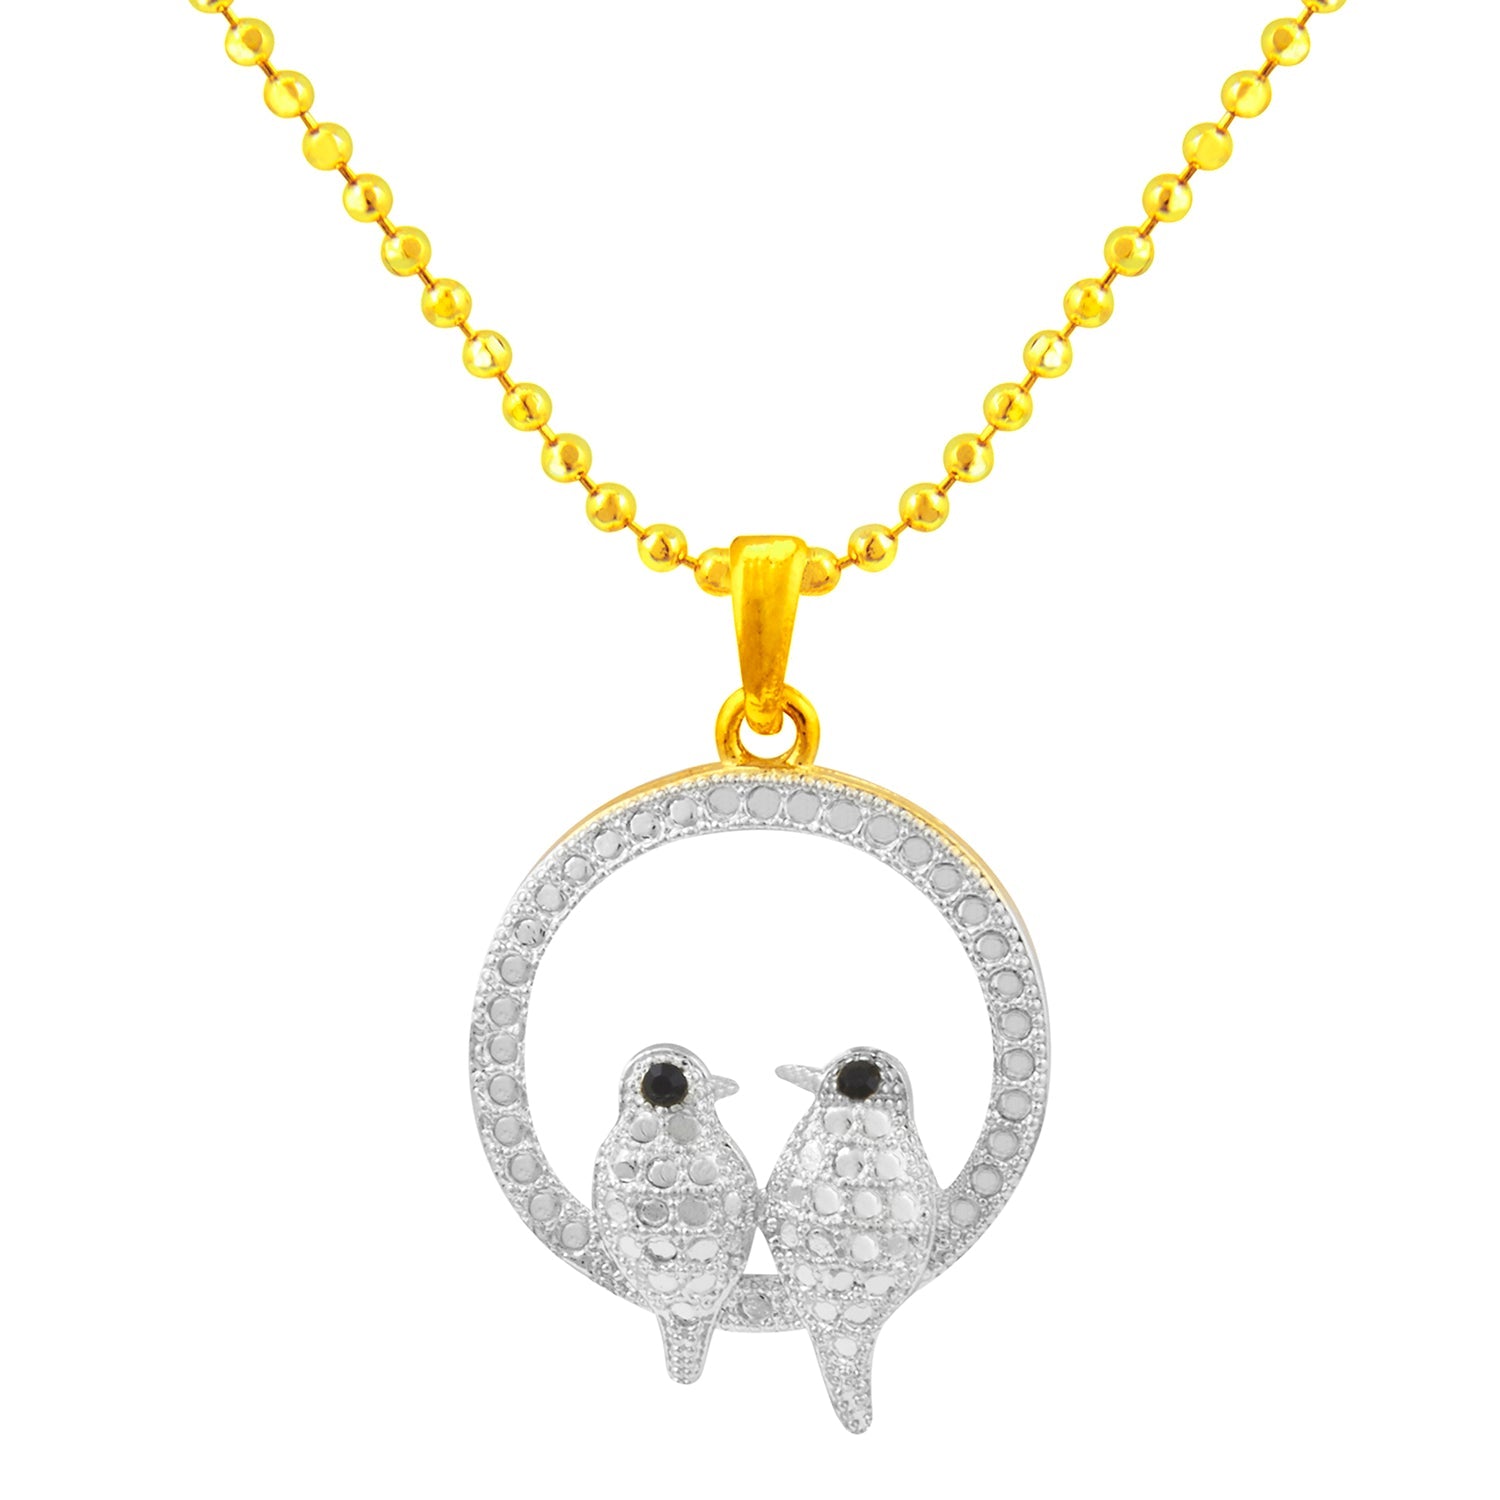 Robin' the robin - Solid silver or gold bird necklace – Gina Pattison  Jewellery